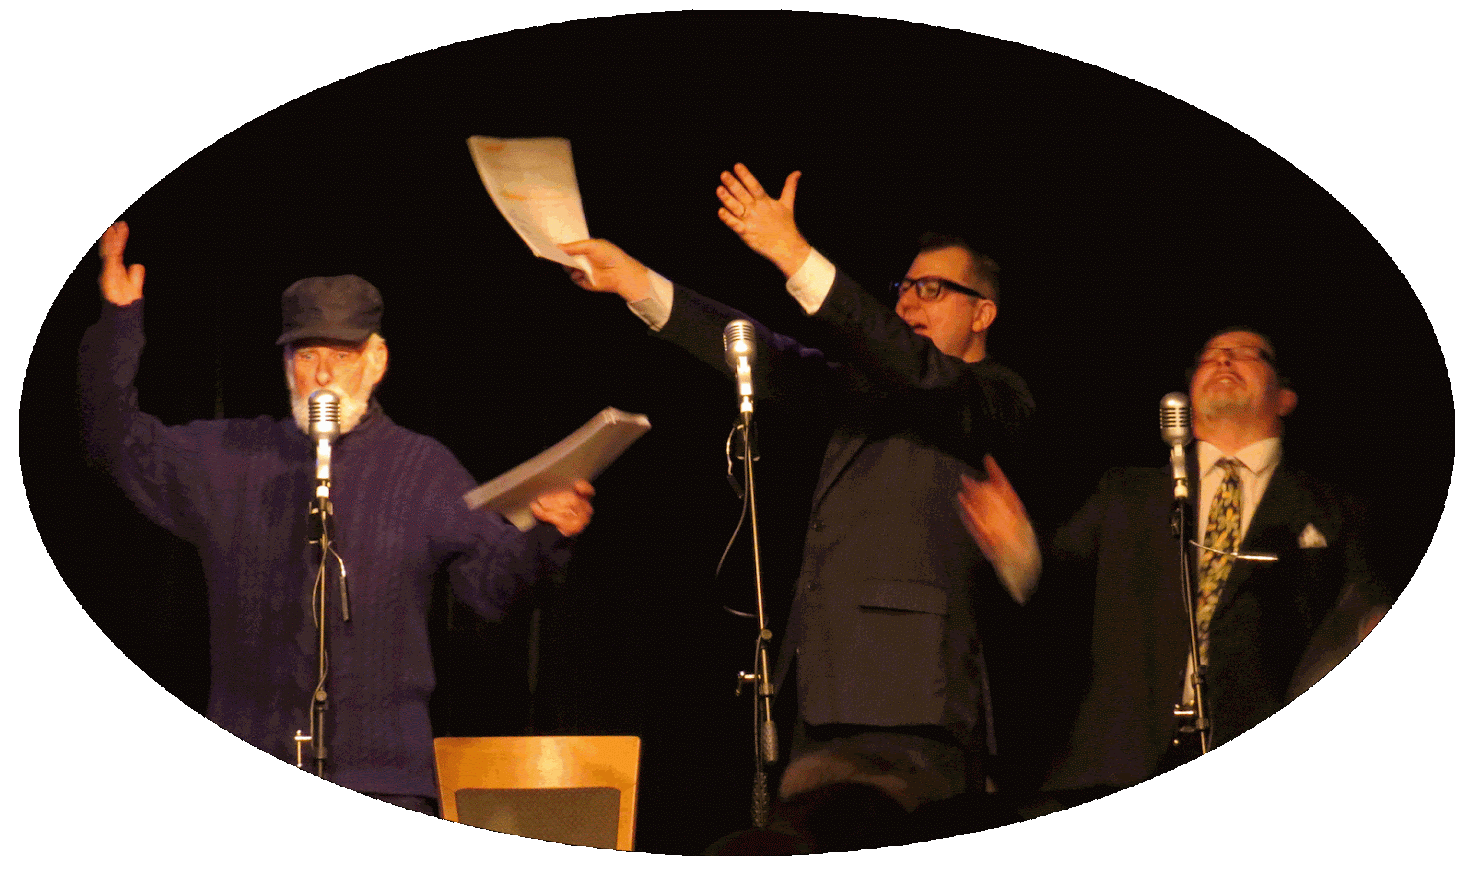 The Goon Show LIVE! on stage